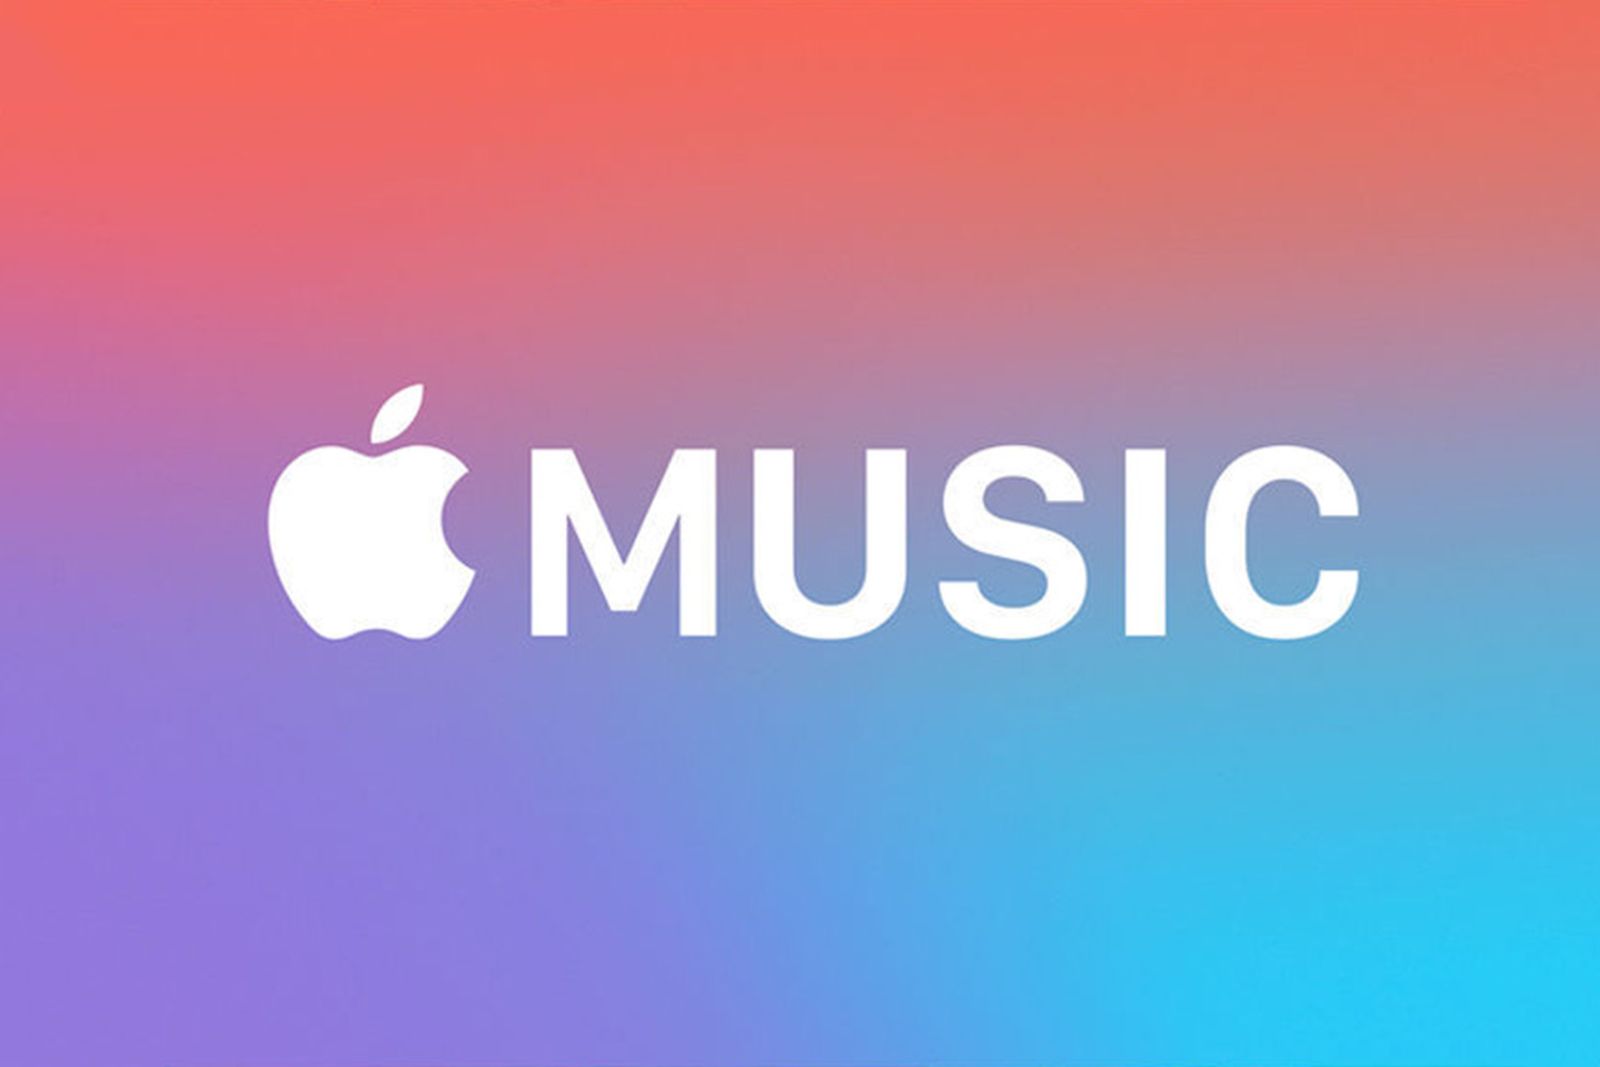 apple music passes spotify subscribers